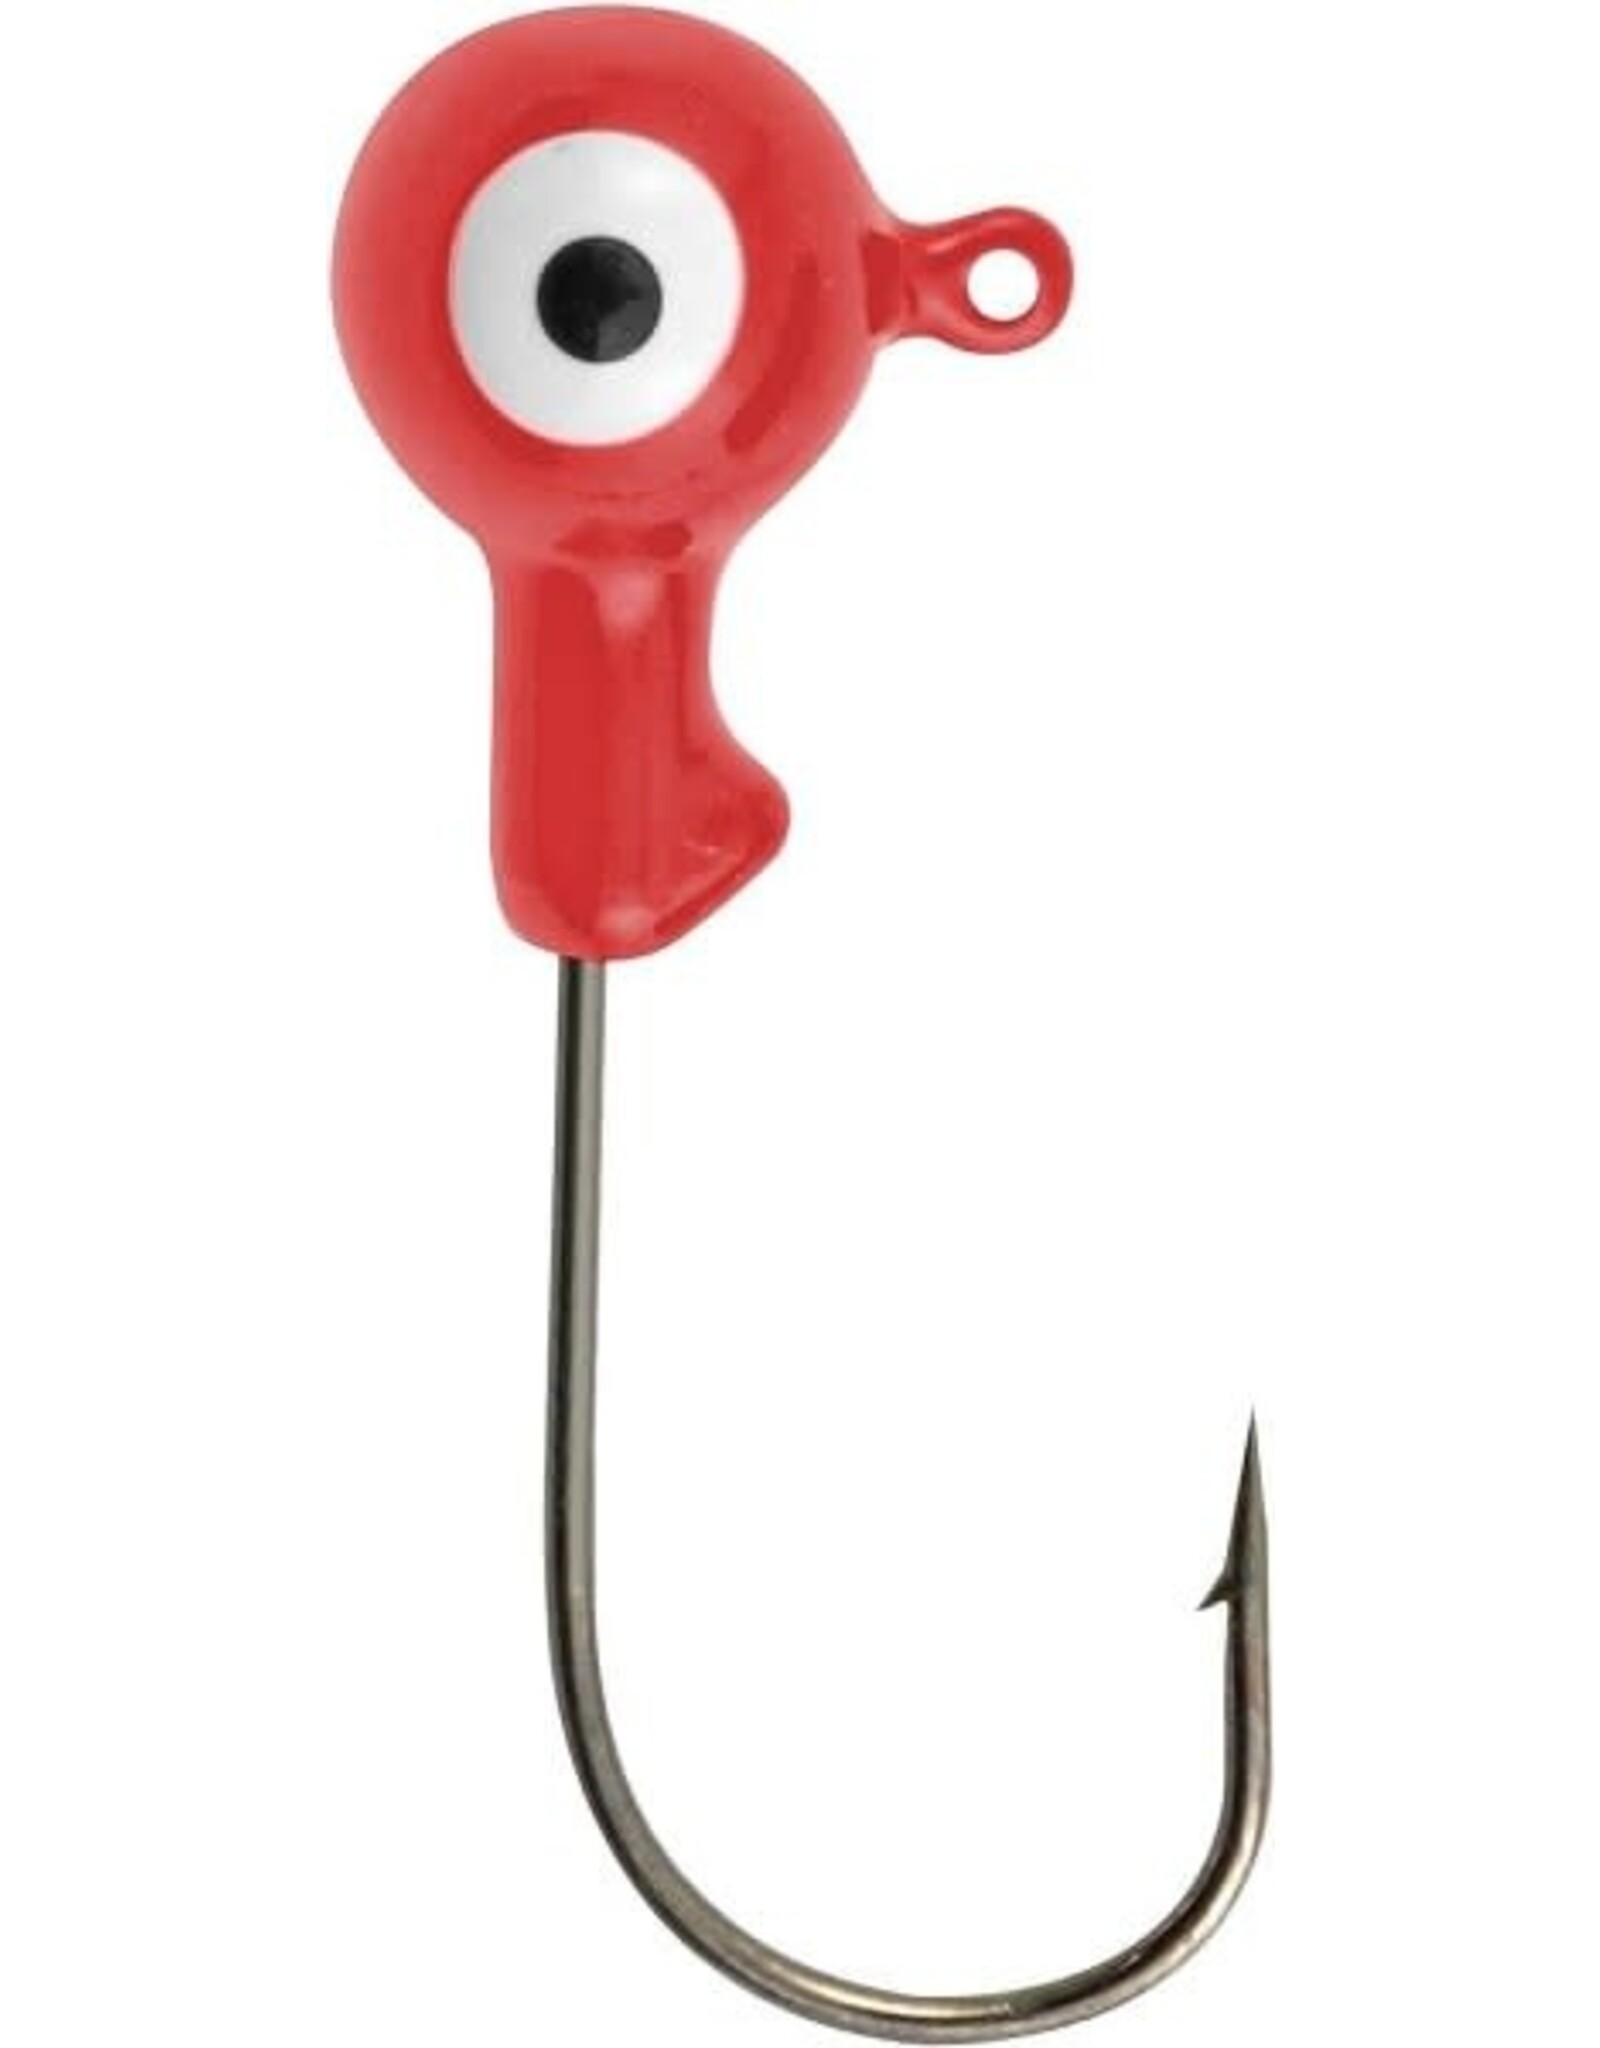 Danielson Double Eye Jig Heads - 1/8 Oz - Fluorescent Red - 8 Count